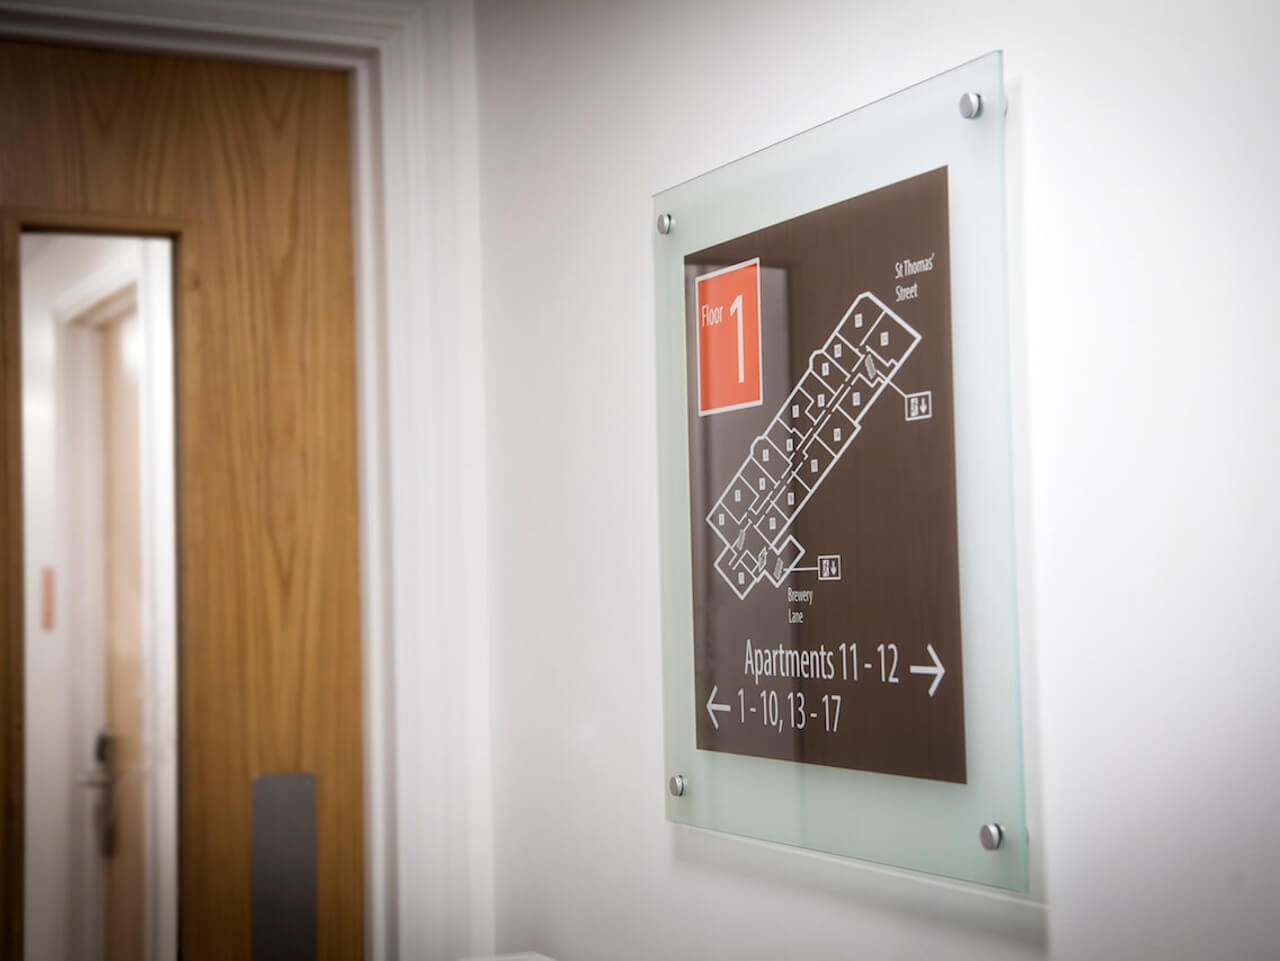 A wayfinding sign to show the directions to apartments on the specific floor